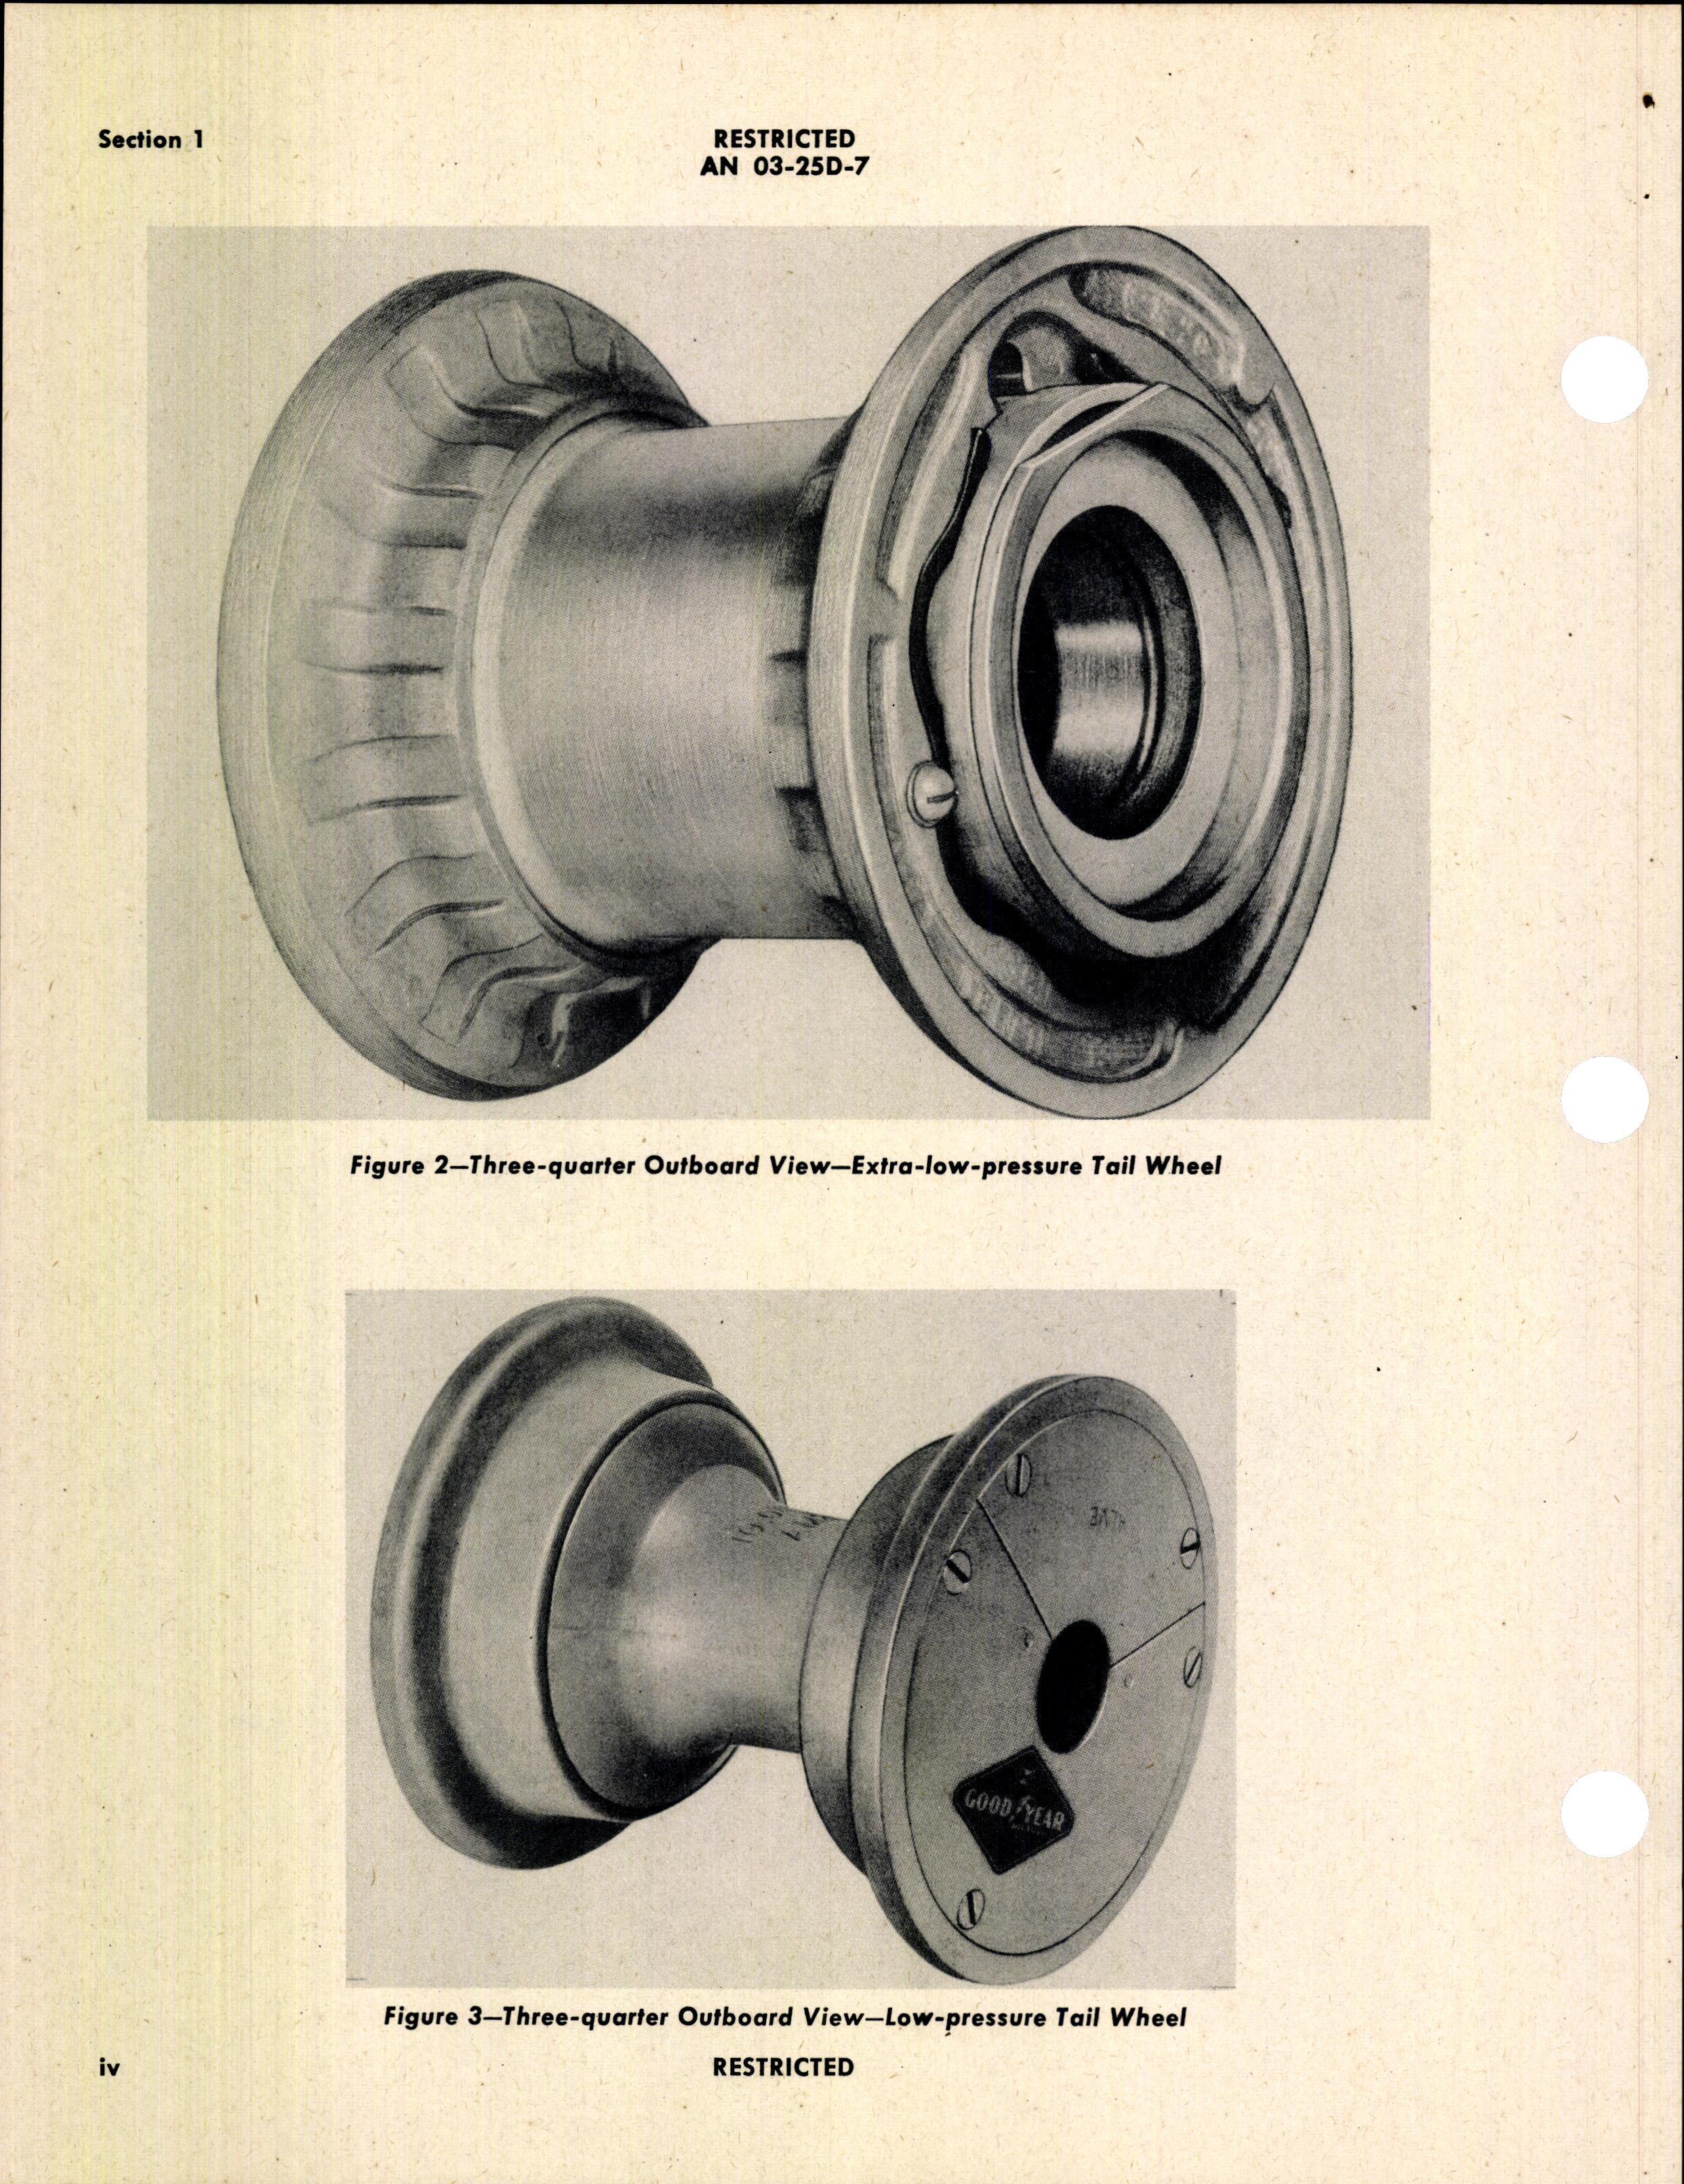 Sample page 6 from AirCorps Library document: Operation, Service and Overhaul Instructions with Parts Catalog for Nose and Tail Wheels